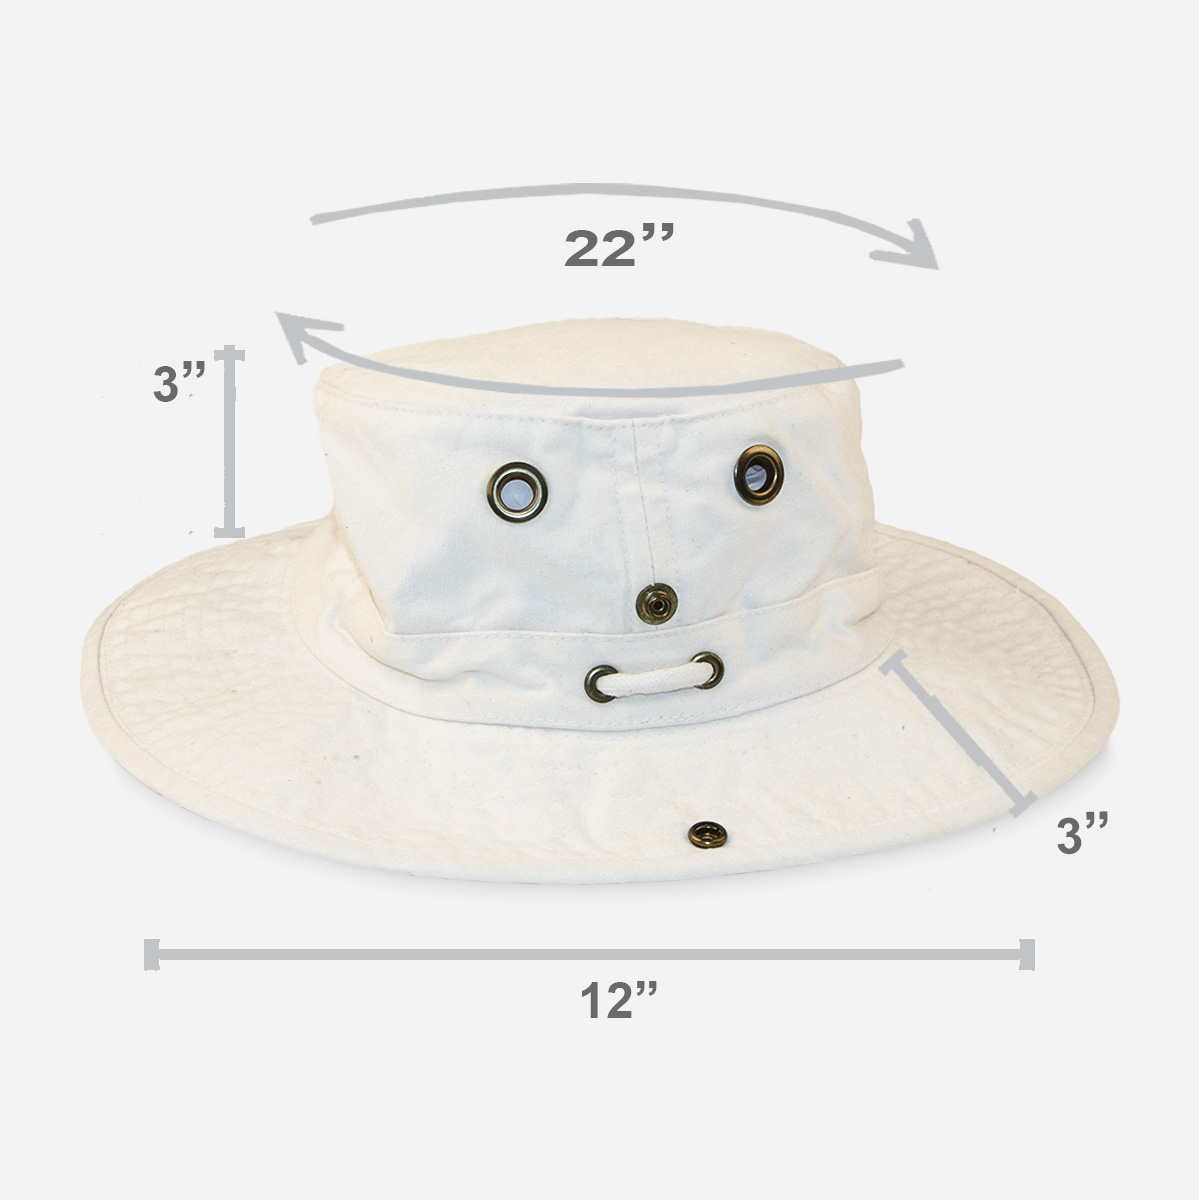 Tilly Hat Size